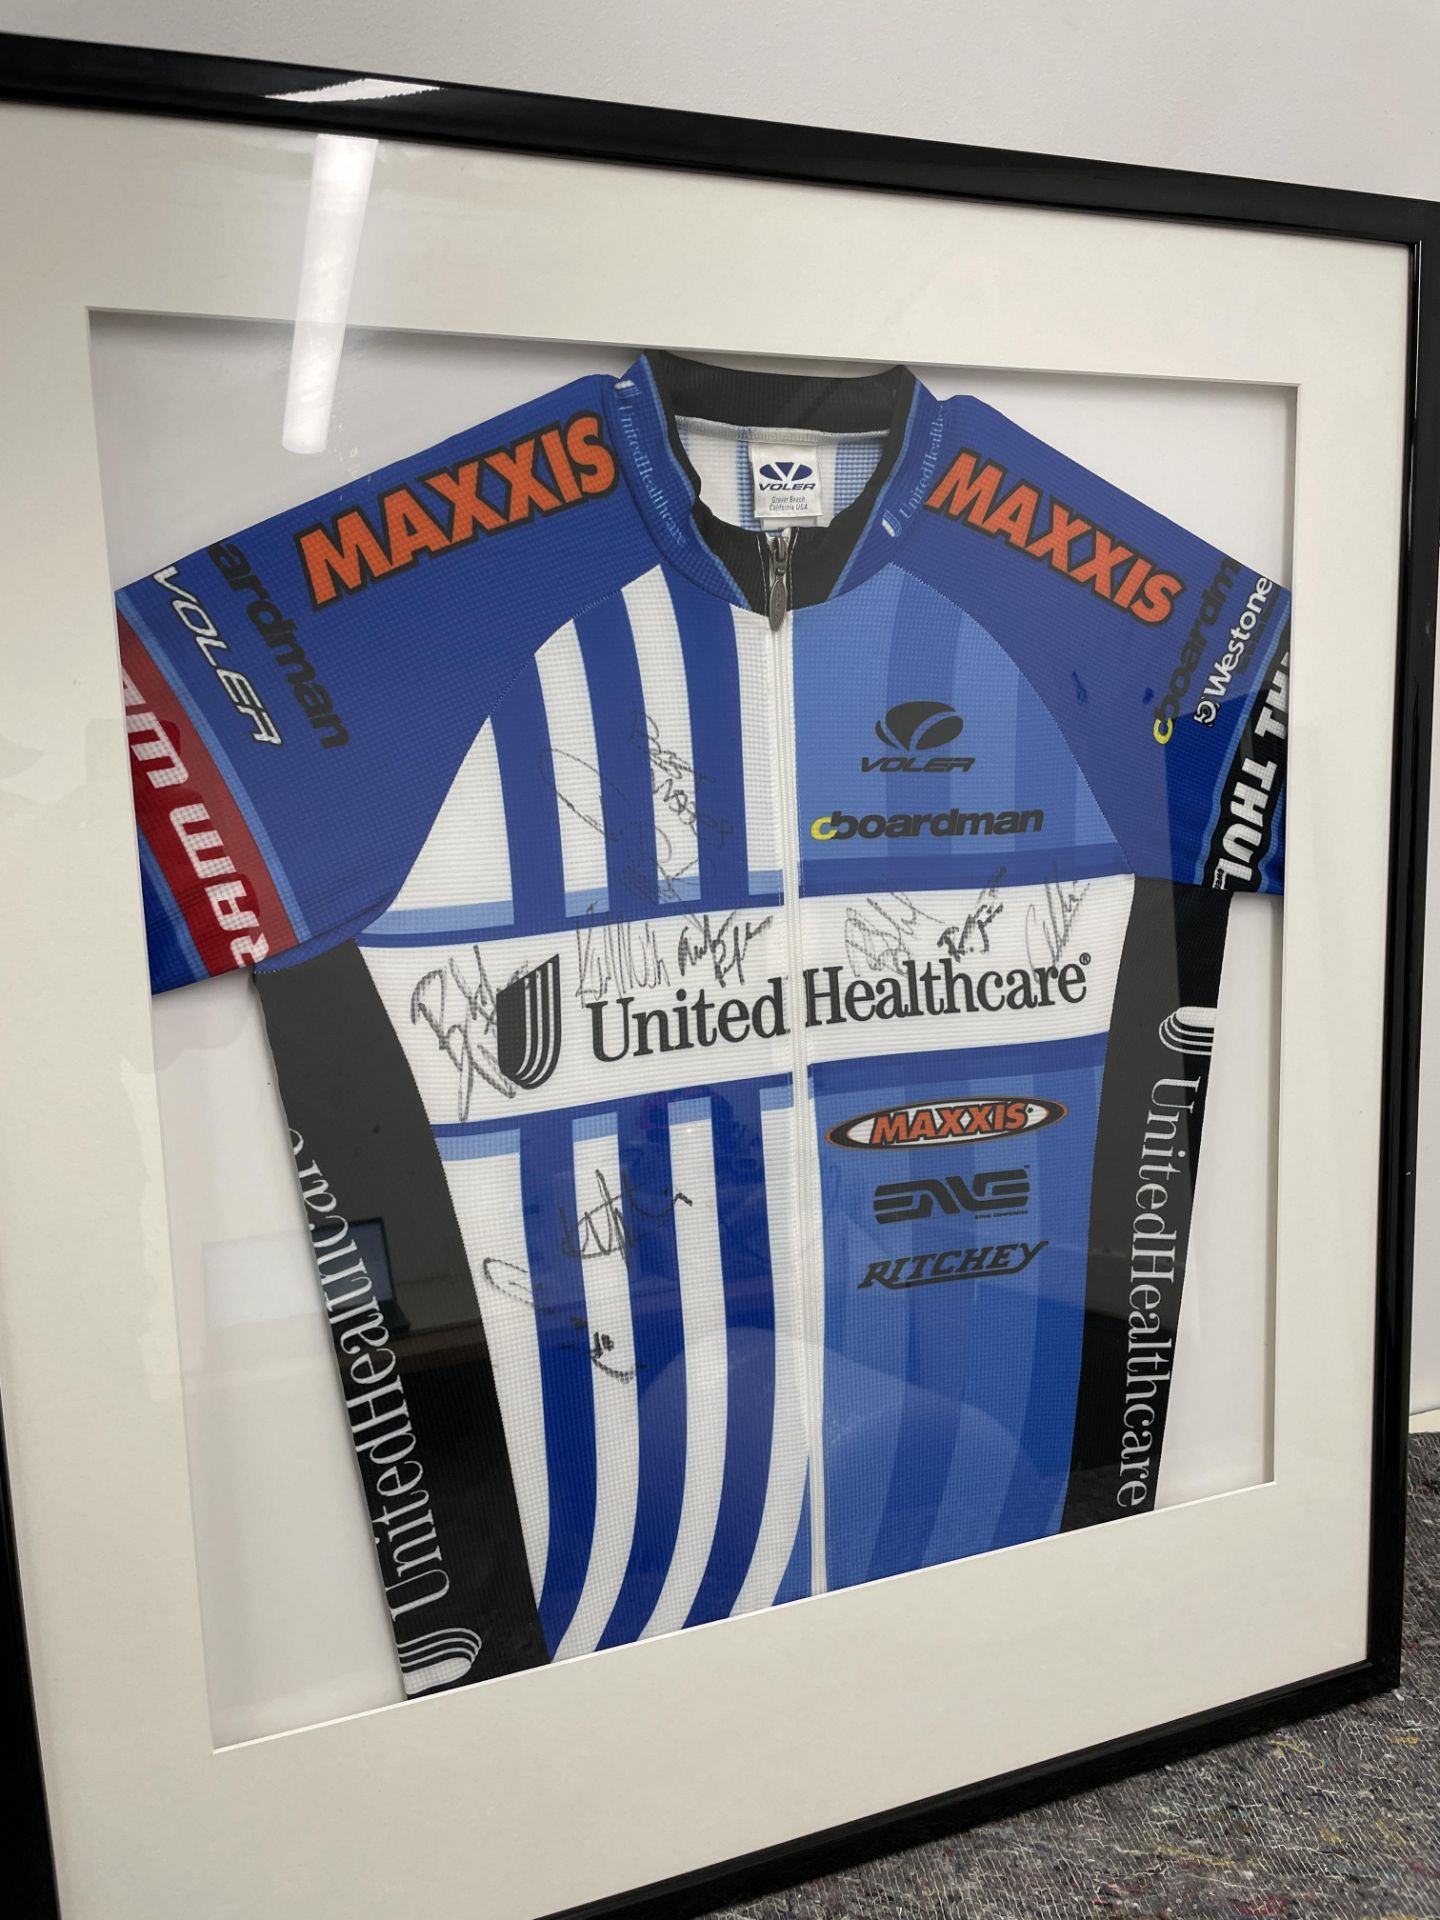 United Health Care - Maxxis Framed & Signed Pro Cycling Team Jersey with Multiple Signatures (Circa